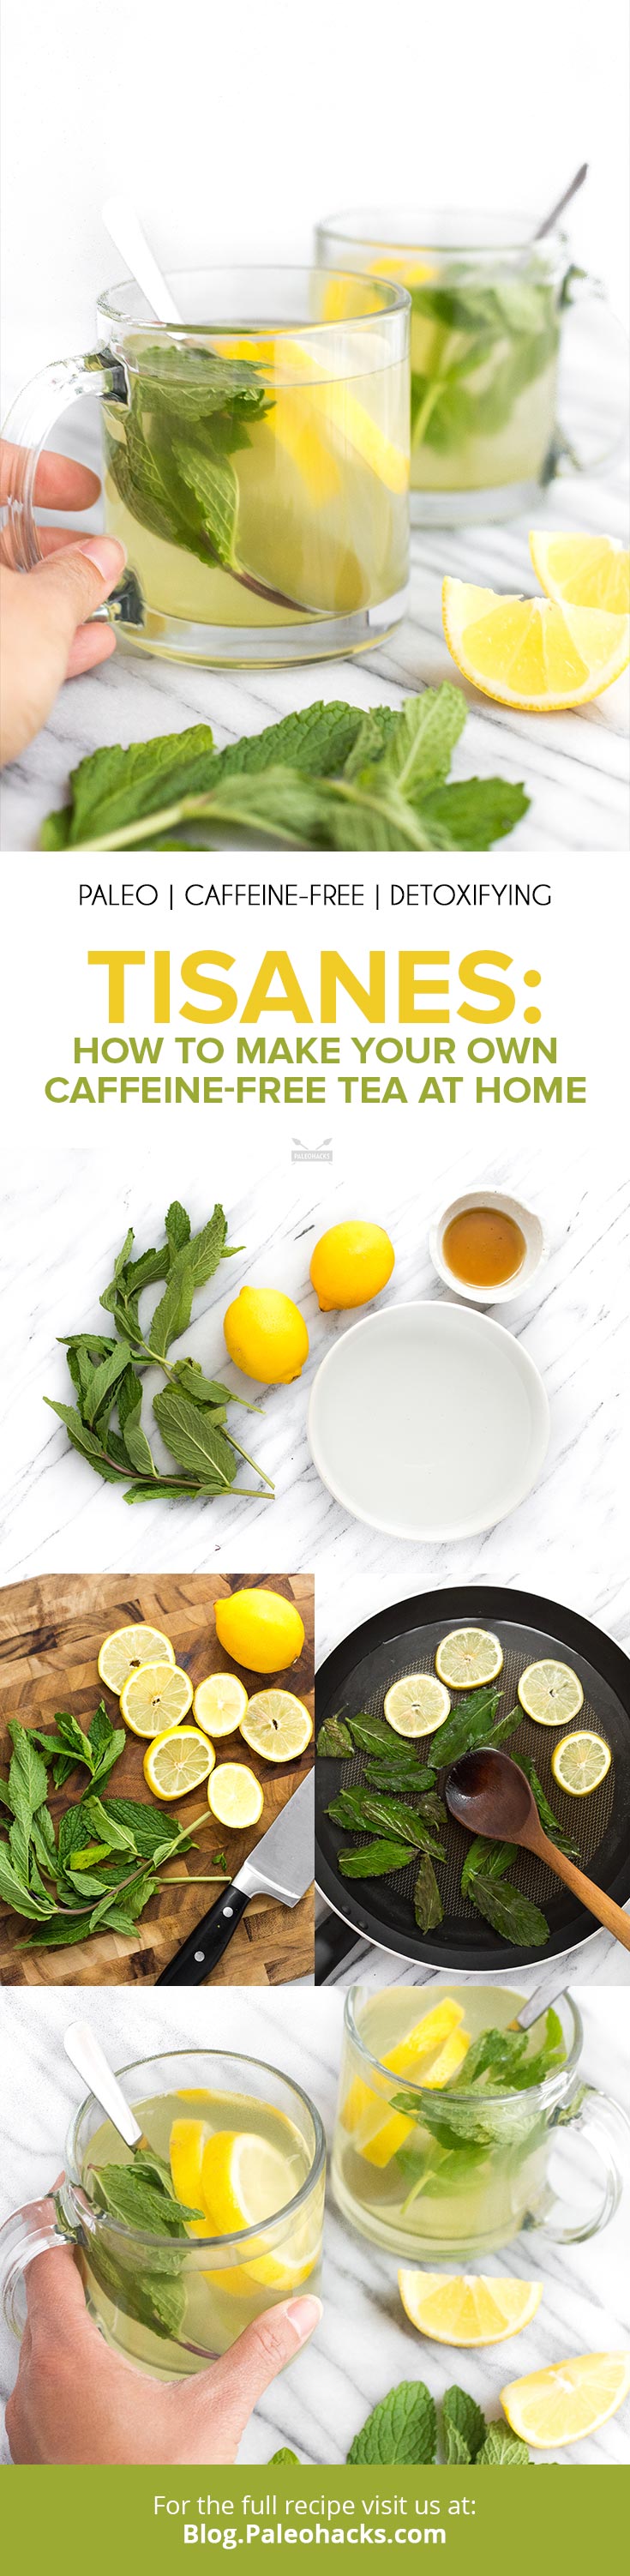 Make your own caffeine-free tea at home with just three simple ingredients and 15 minutes. You won't want to sleep on this recipe!